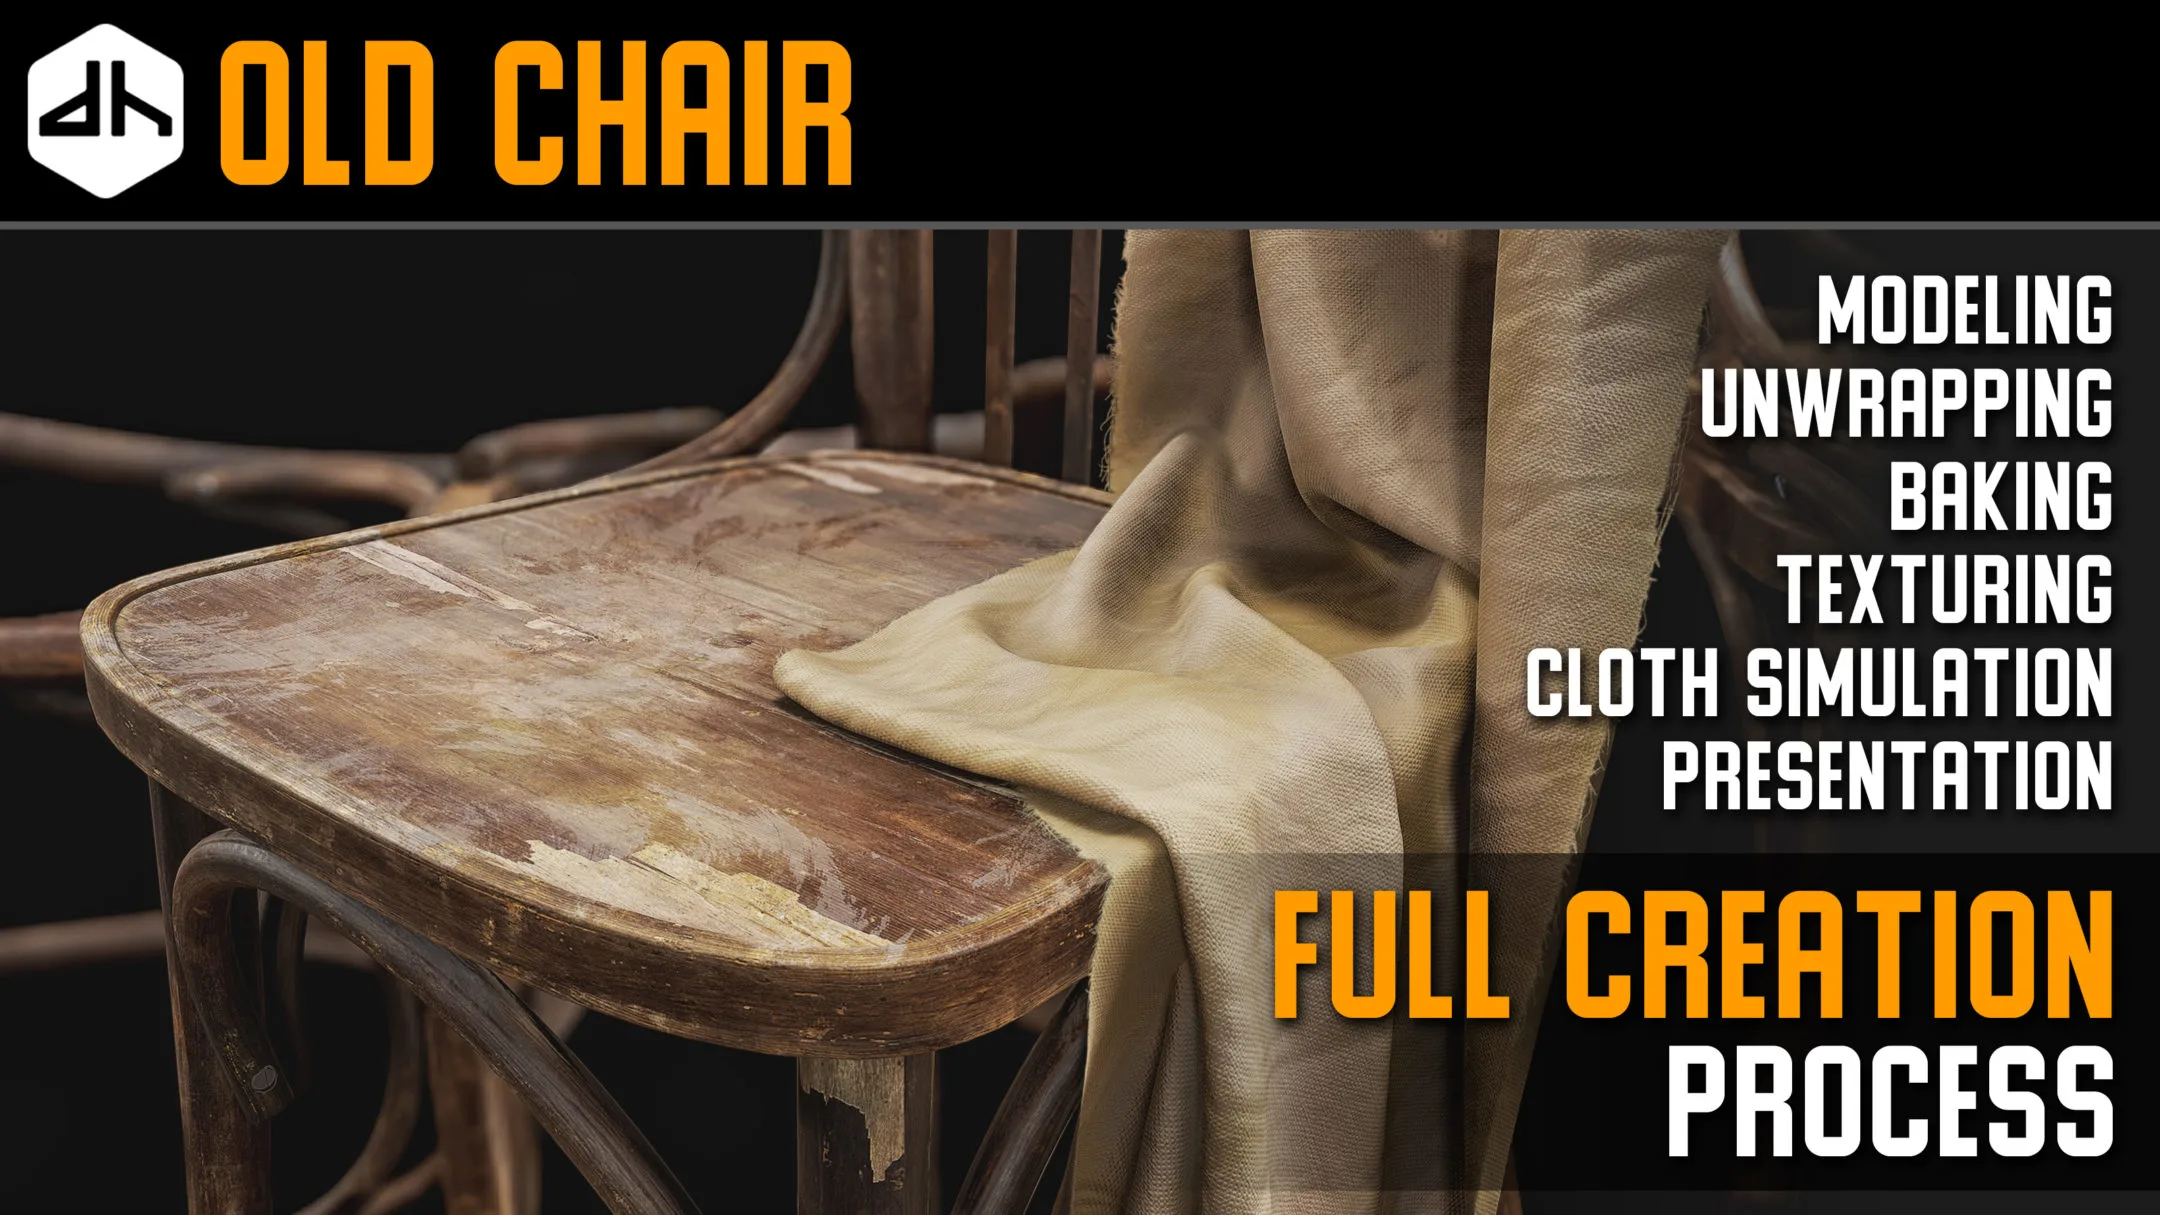 Old Chair Full Creation Process